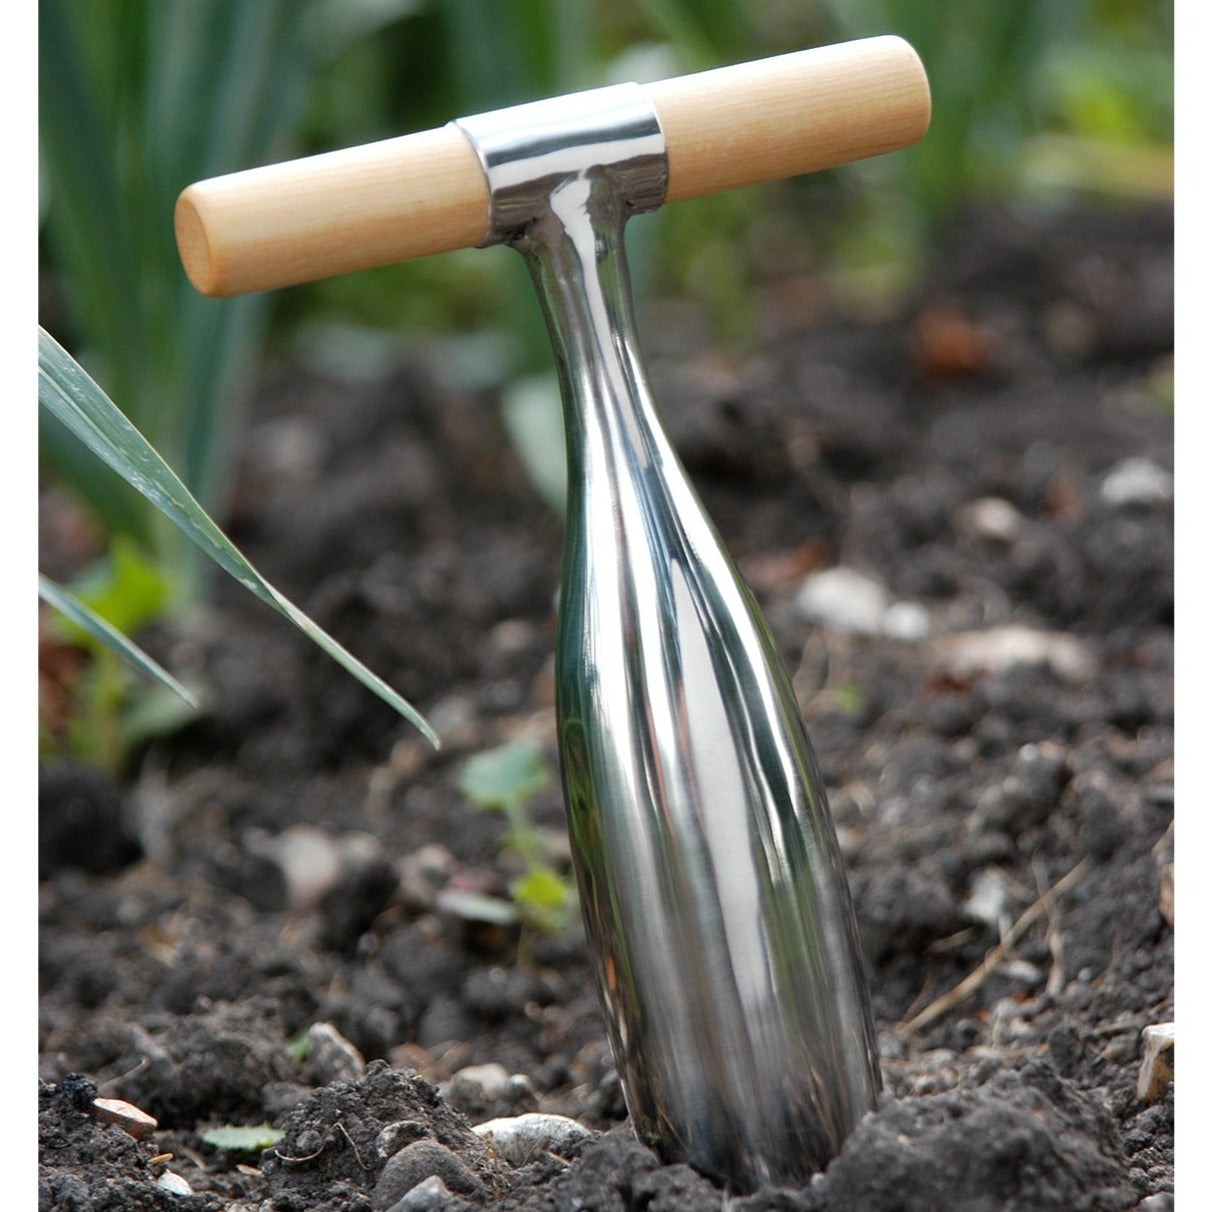 This stylish and tactile dibber is invaluable for planting seeds, seedlings and bulbs.